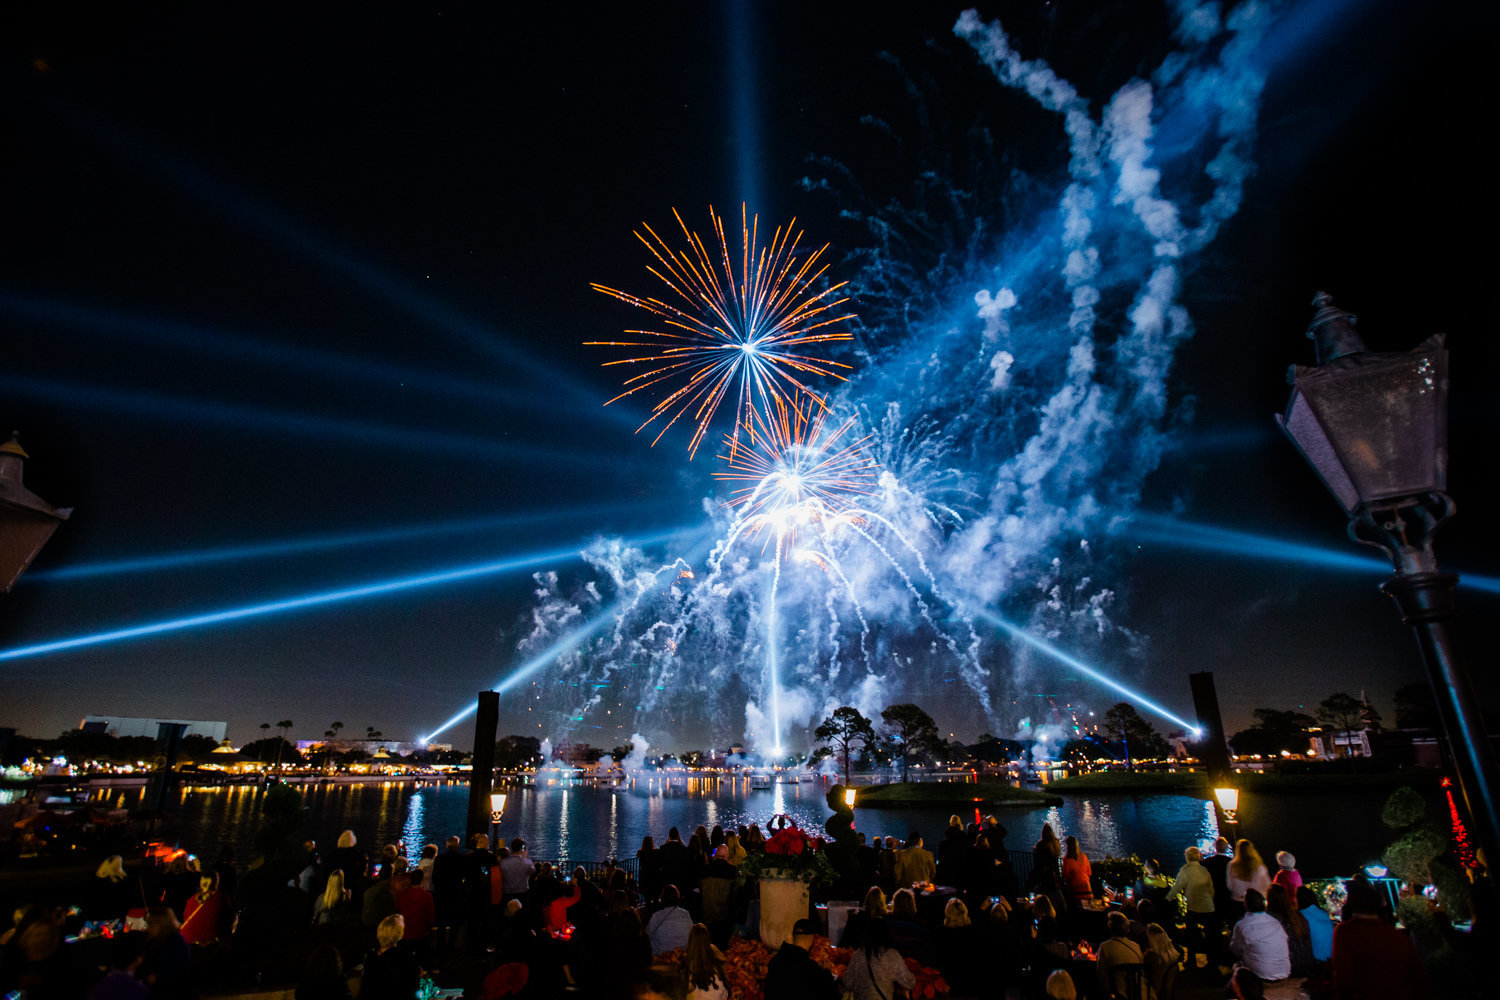 Fireworks and laser show in the sky over a crowd and lake at EPCOT Disney